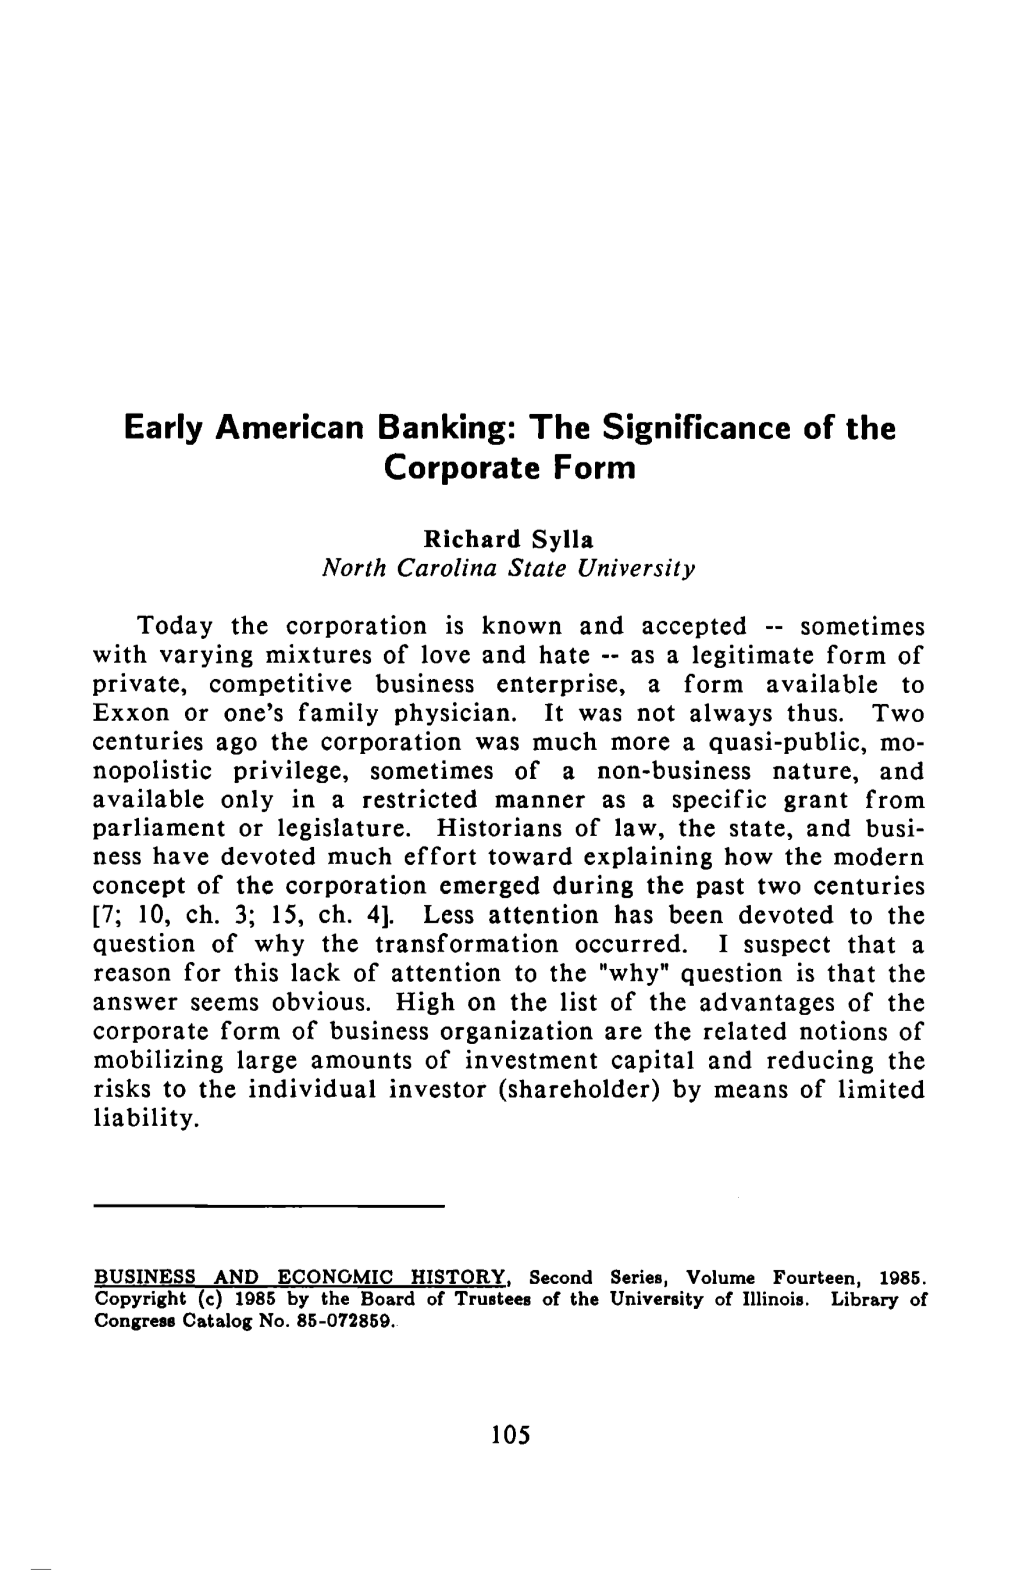 Early American Banking: the Significance of the Corporate Form